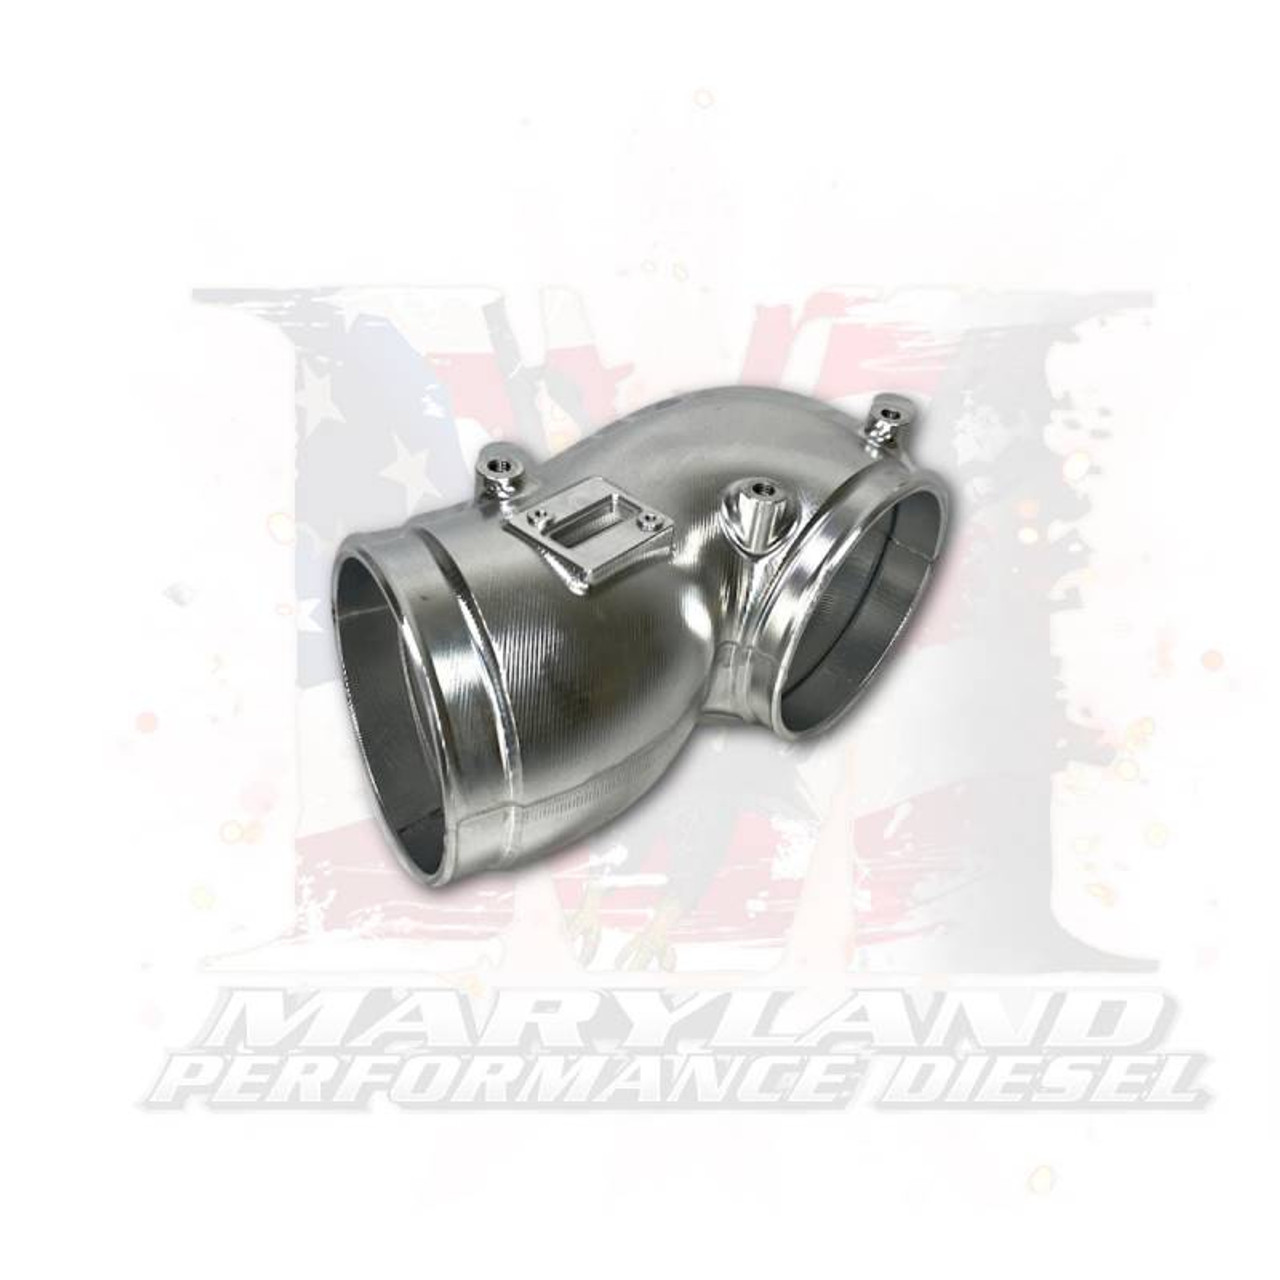 MPD Compound Kit for 2017 to 2019 Ford 6.7L Powerstroke (MPD-67-PSD-1719-CTK) Billet Intake View